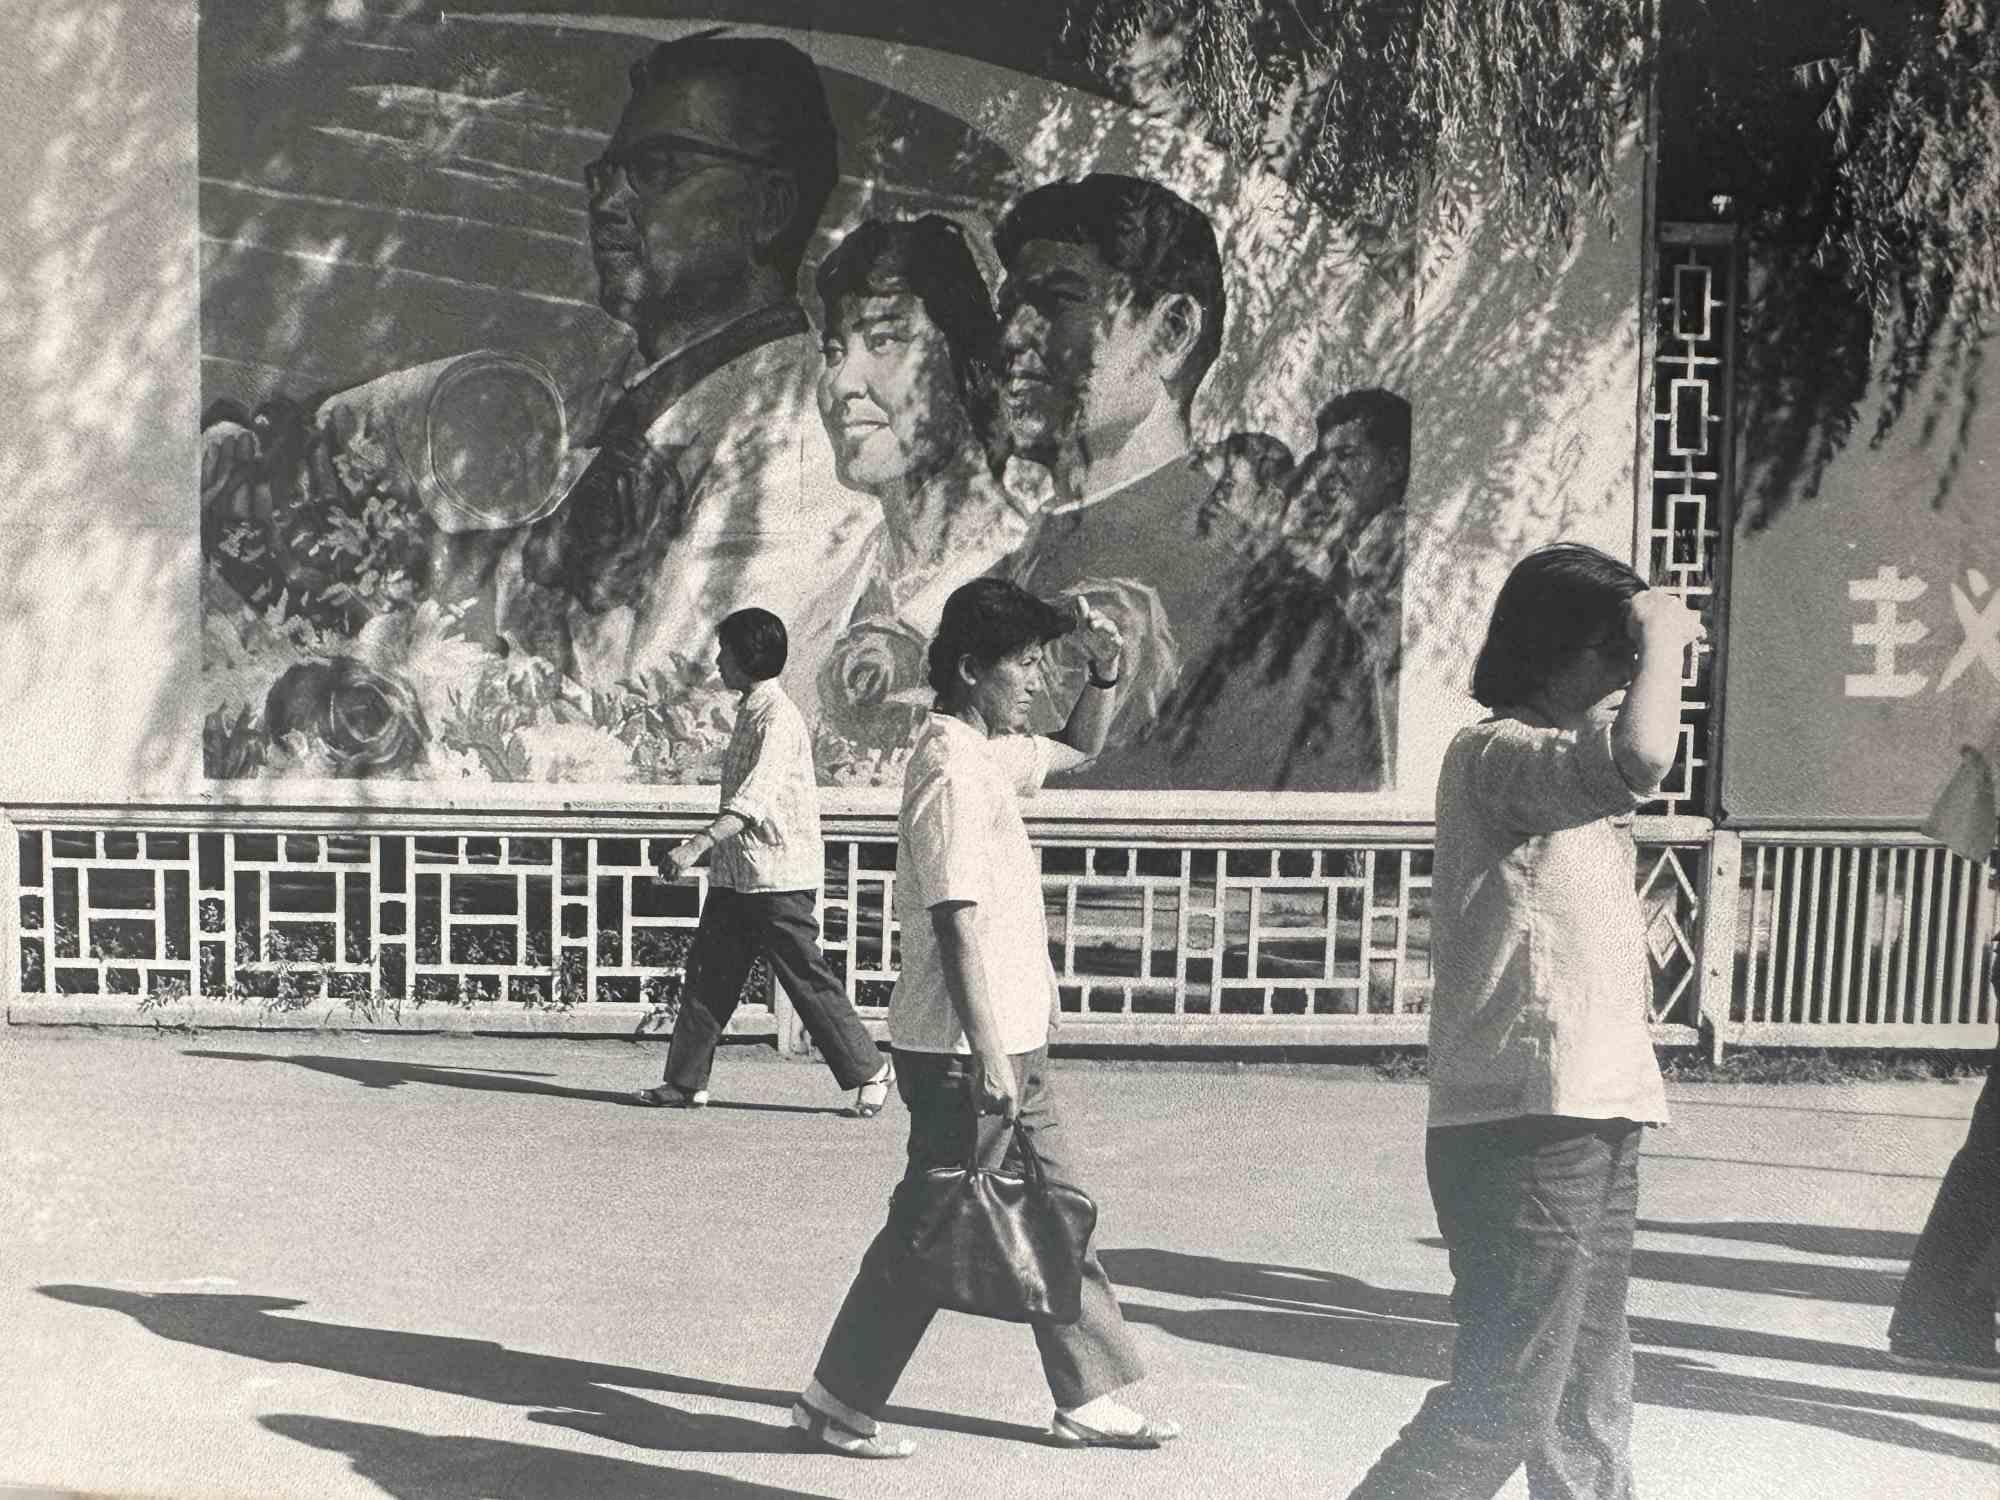 Unknown Figurative Photograph - Historical Photo - China in 1980s - Vintage Photo